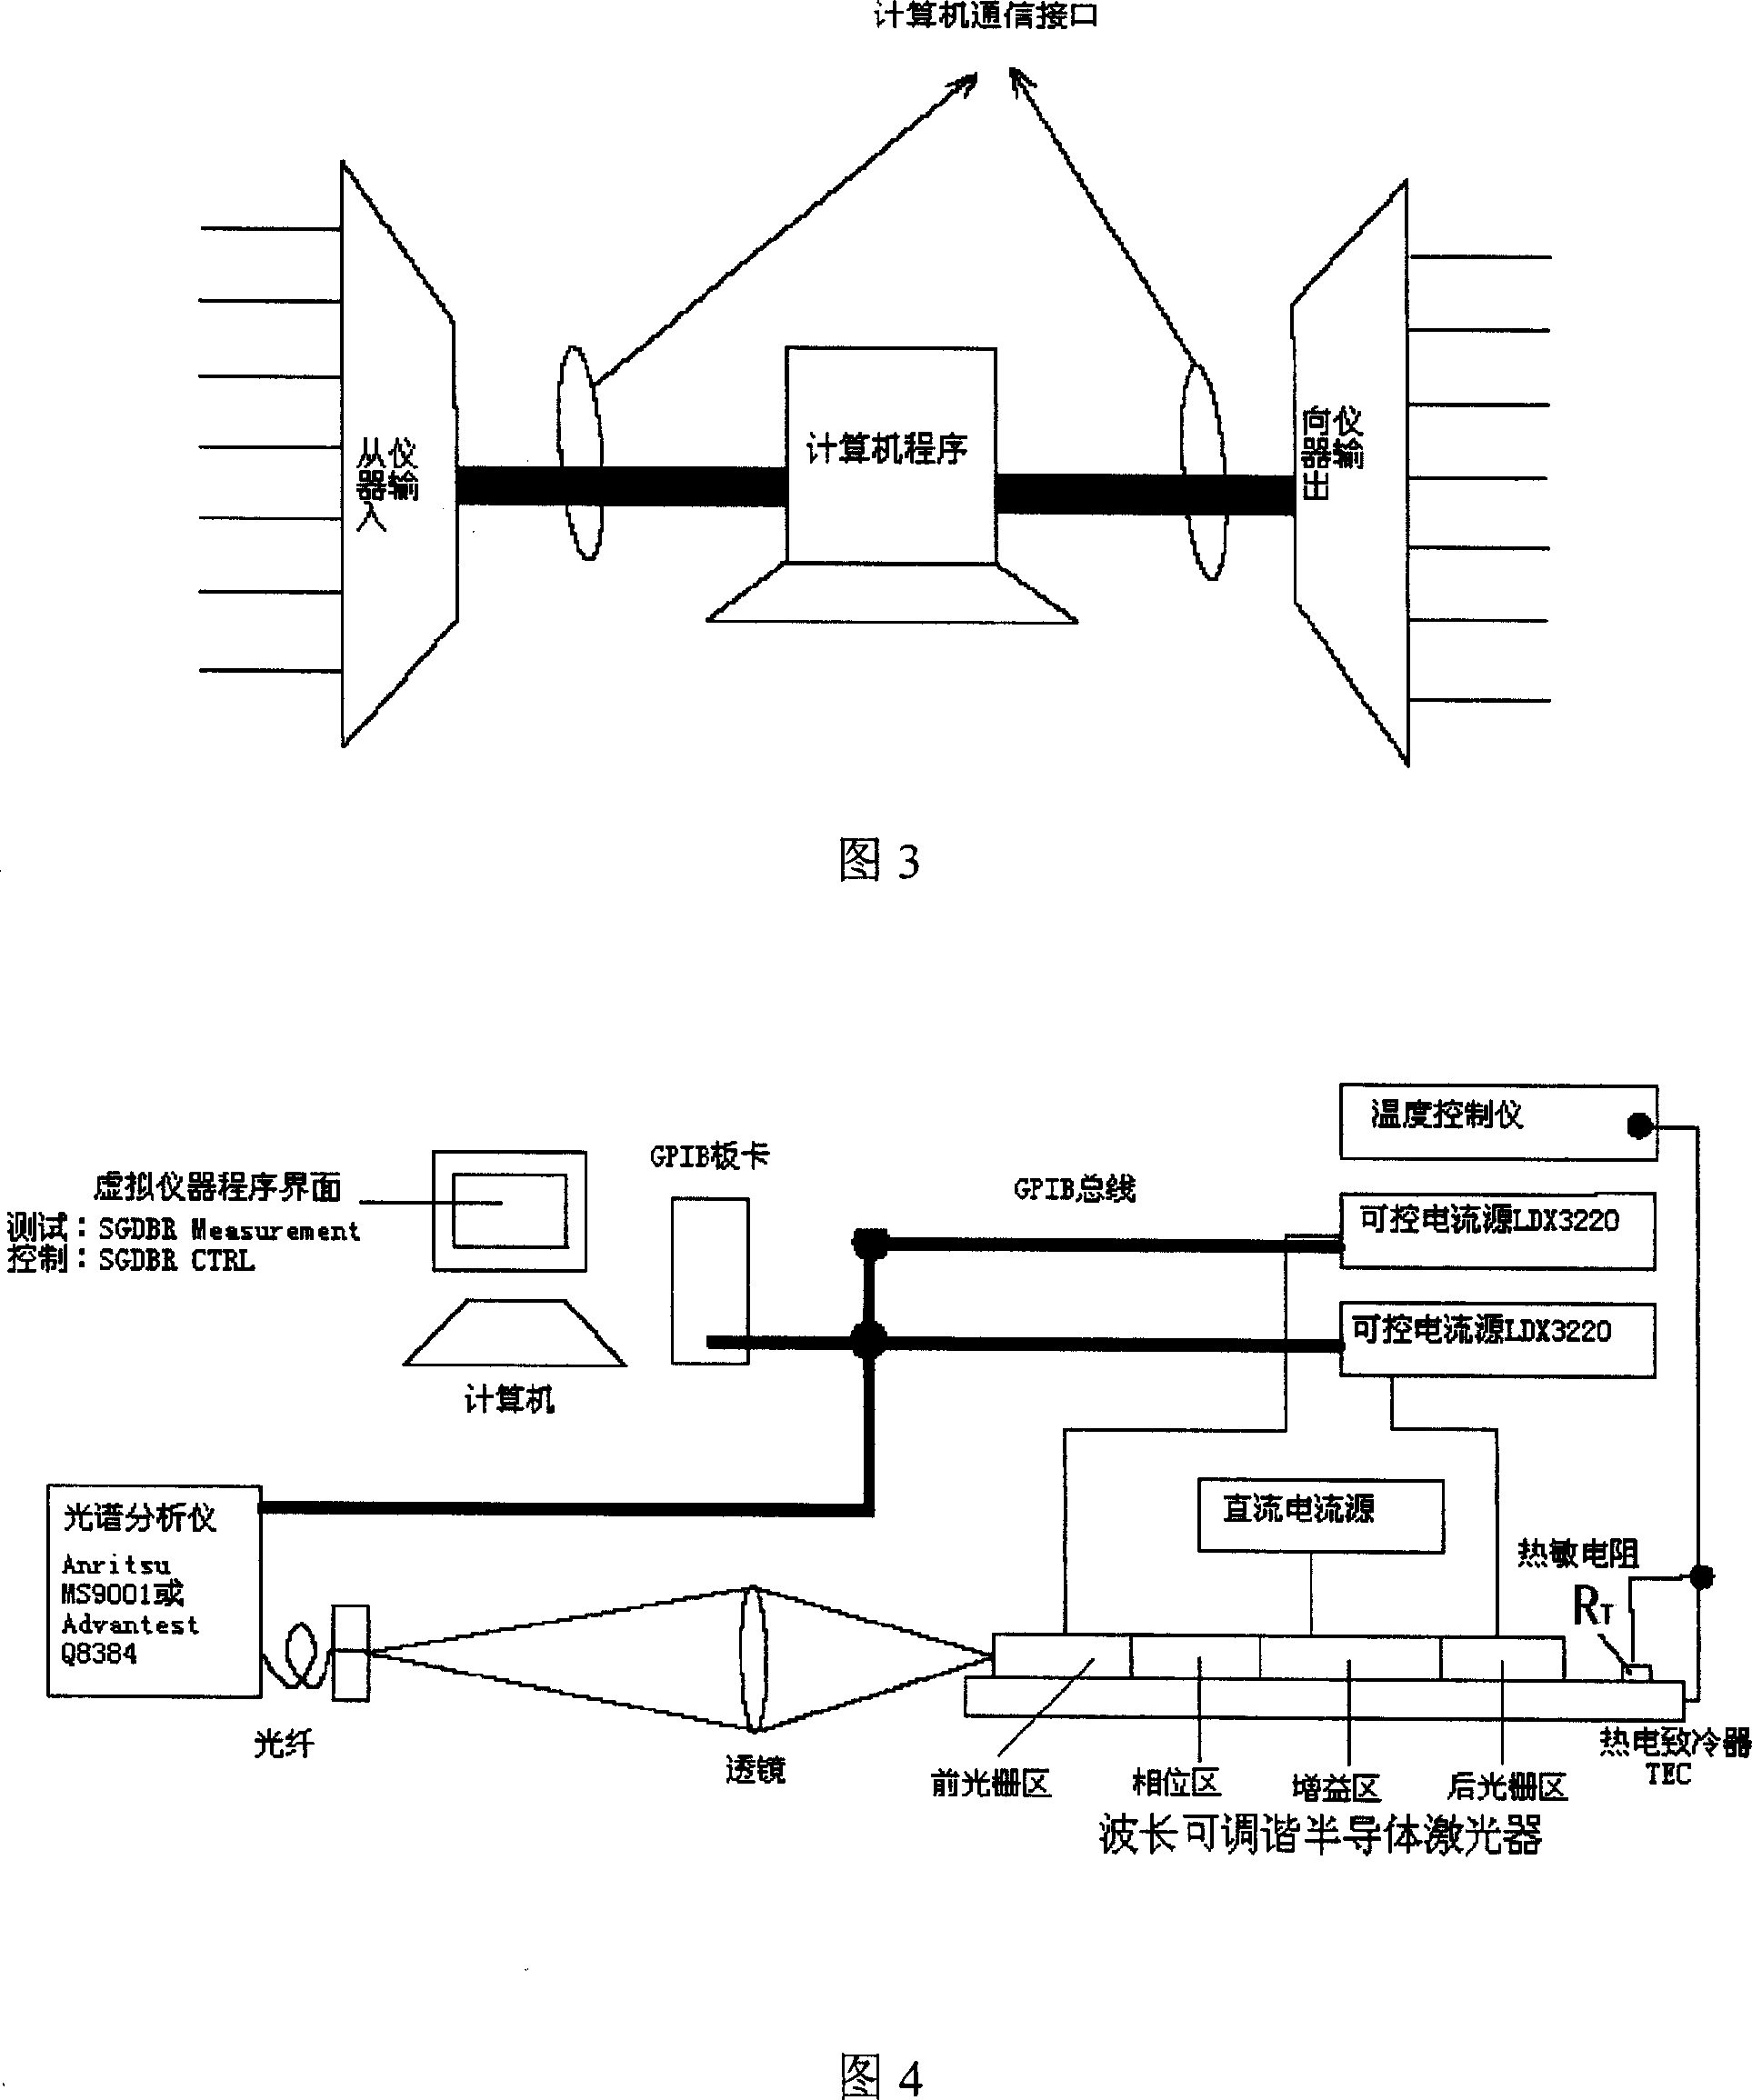 Automated test control system and method for wavelength tunable laser